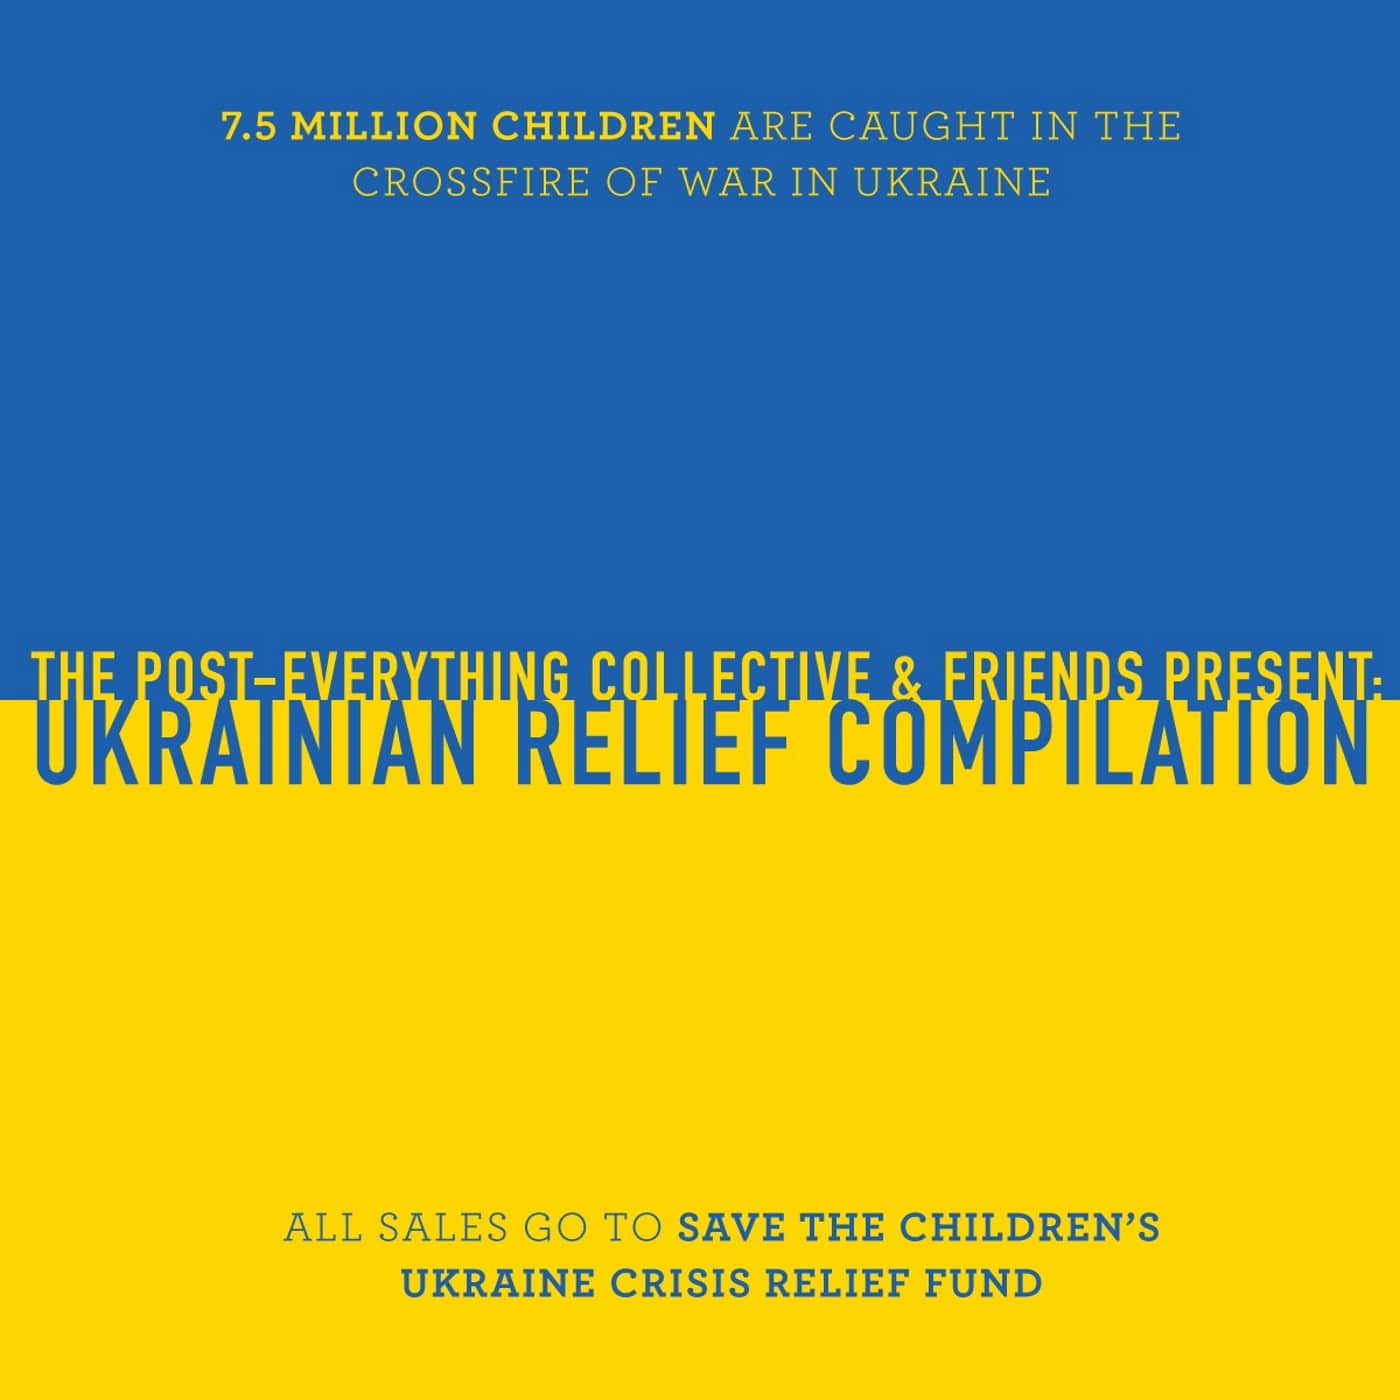 UKRAINE: Help us raise much needed funds for children and families in need!